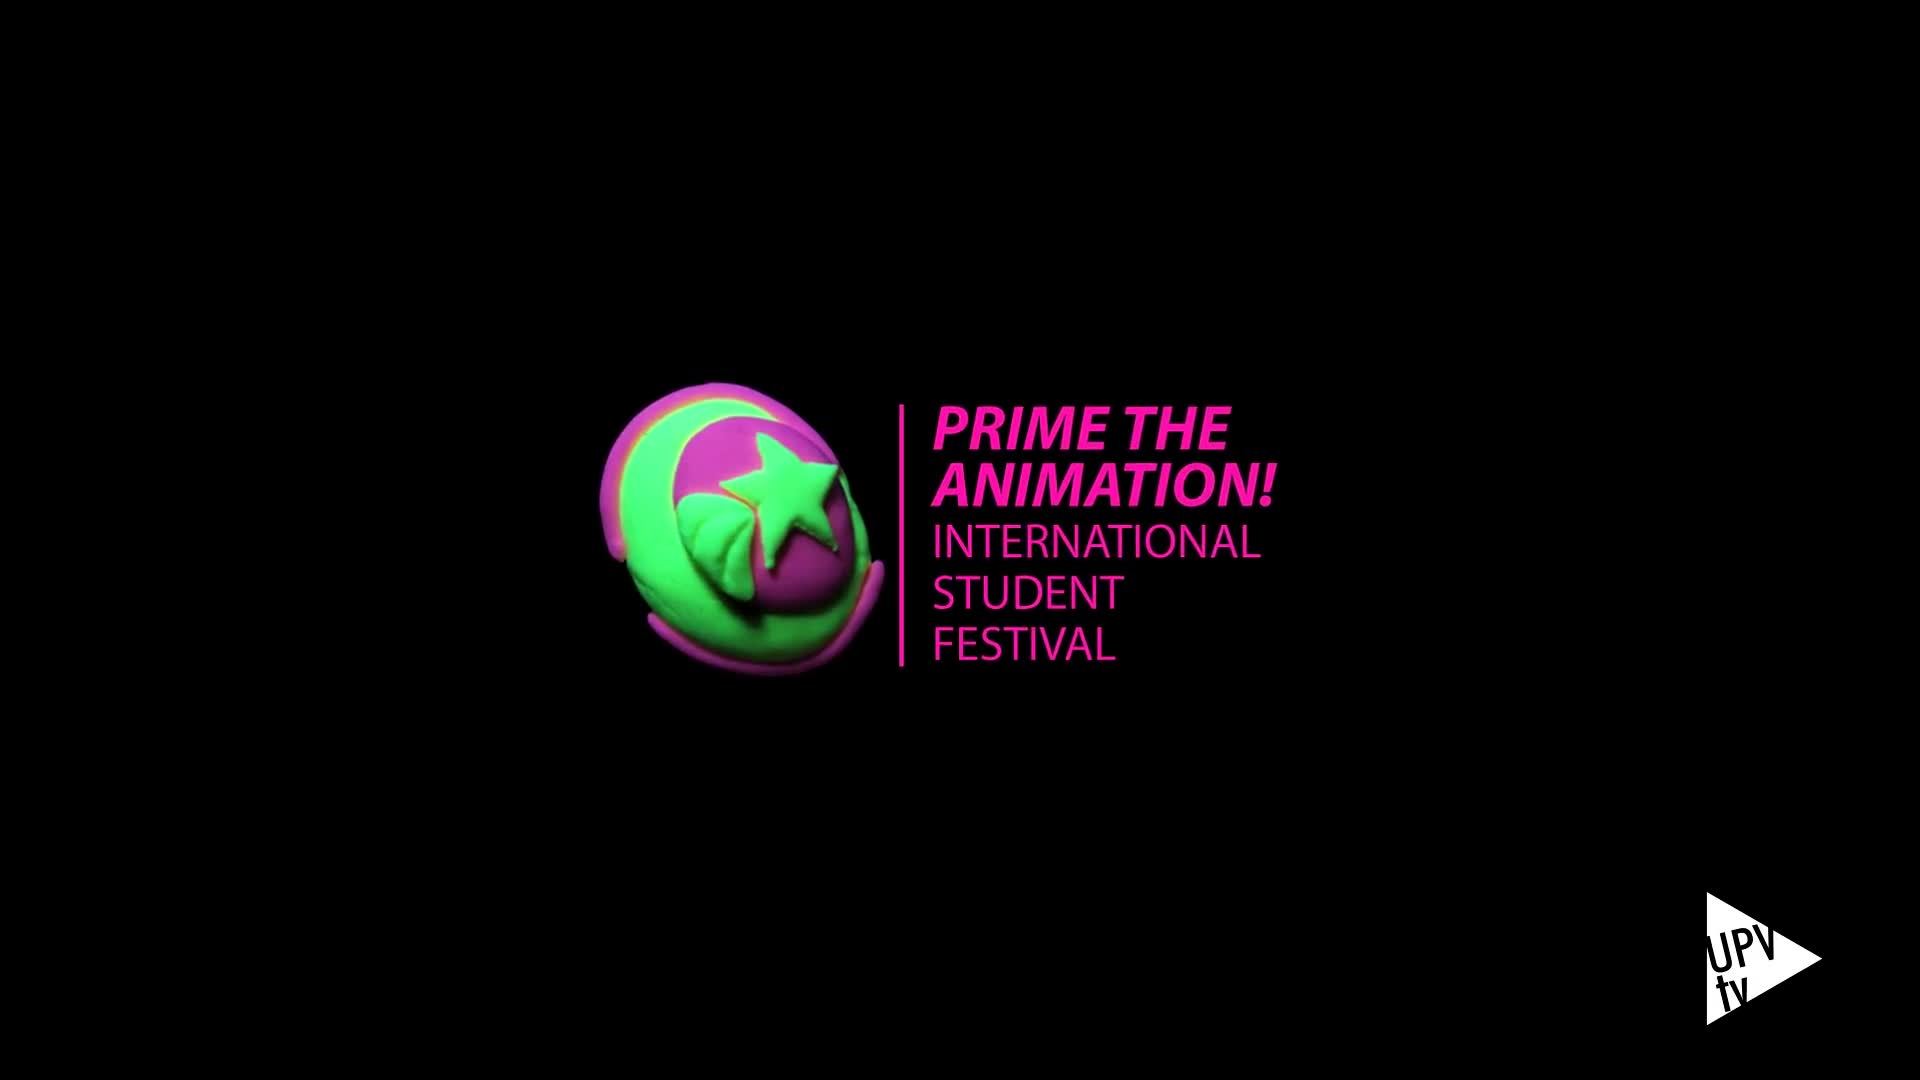 01-10-2019 Prime the Animation 7!